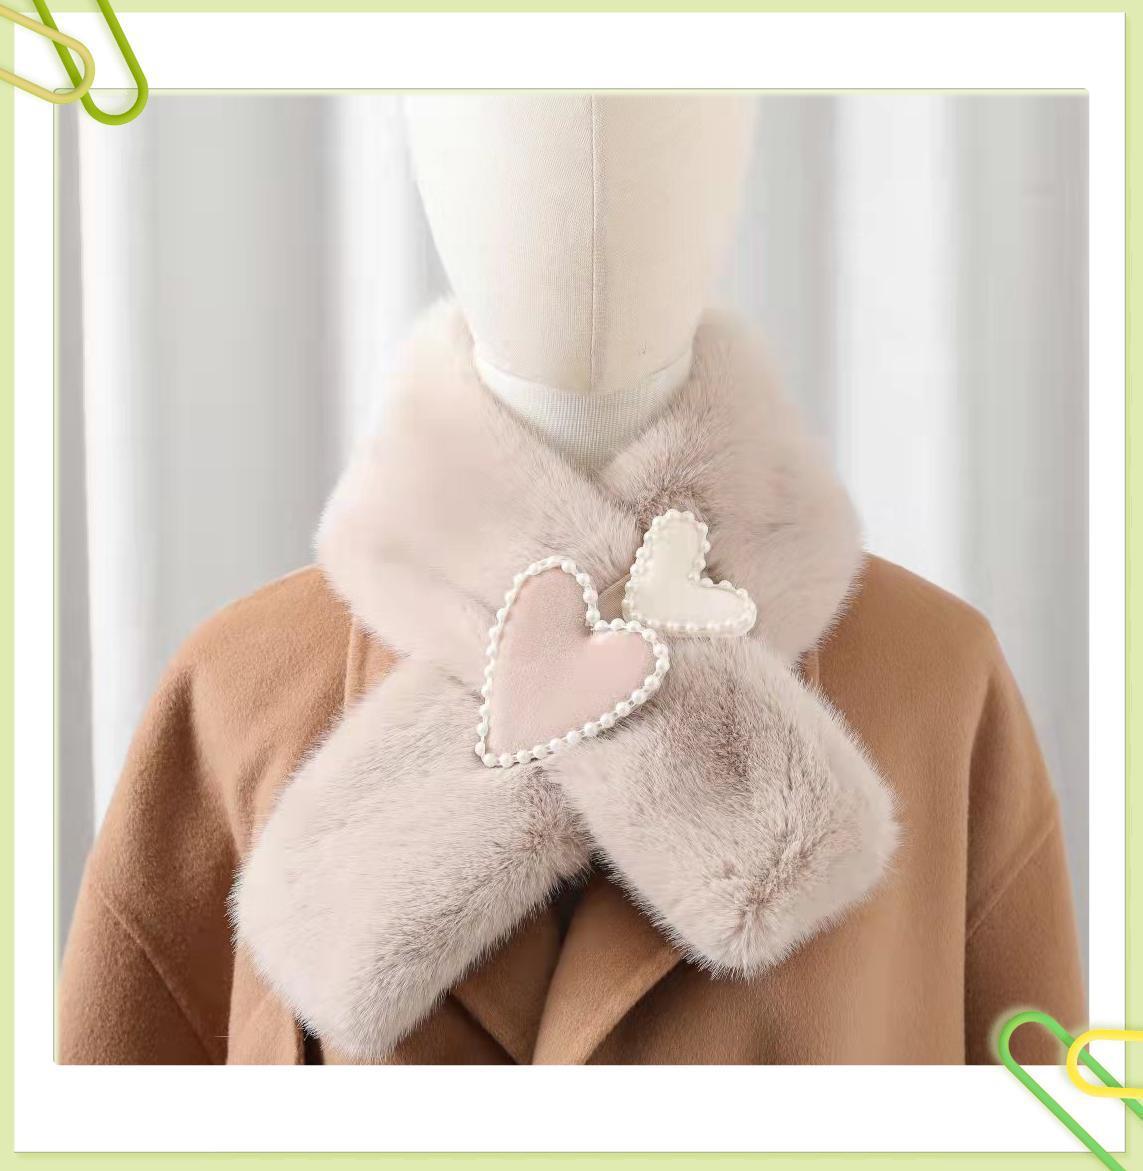 New Winter Thick Mid-Length Anti-Rabbit Fur Cross Scarf Cute Love Scarf Female Texture Boutique Hot Sale